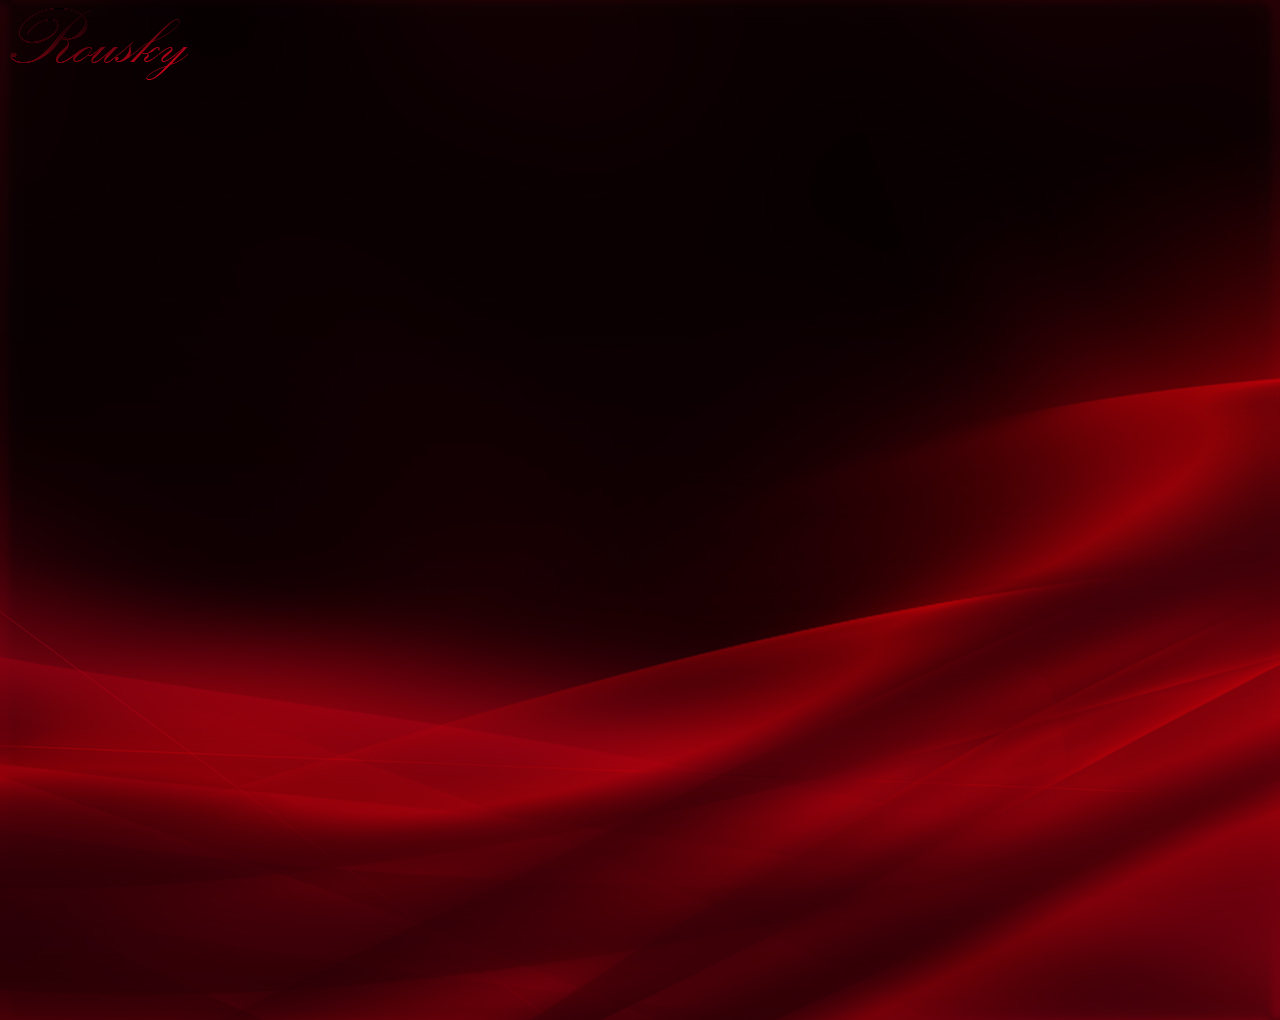 Red Picture by Rousky